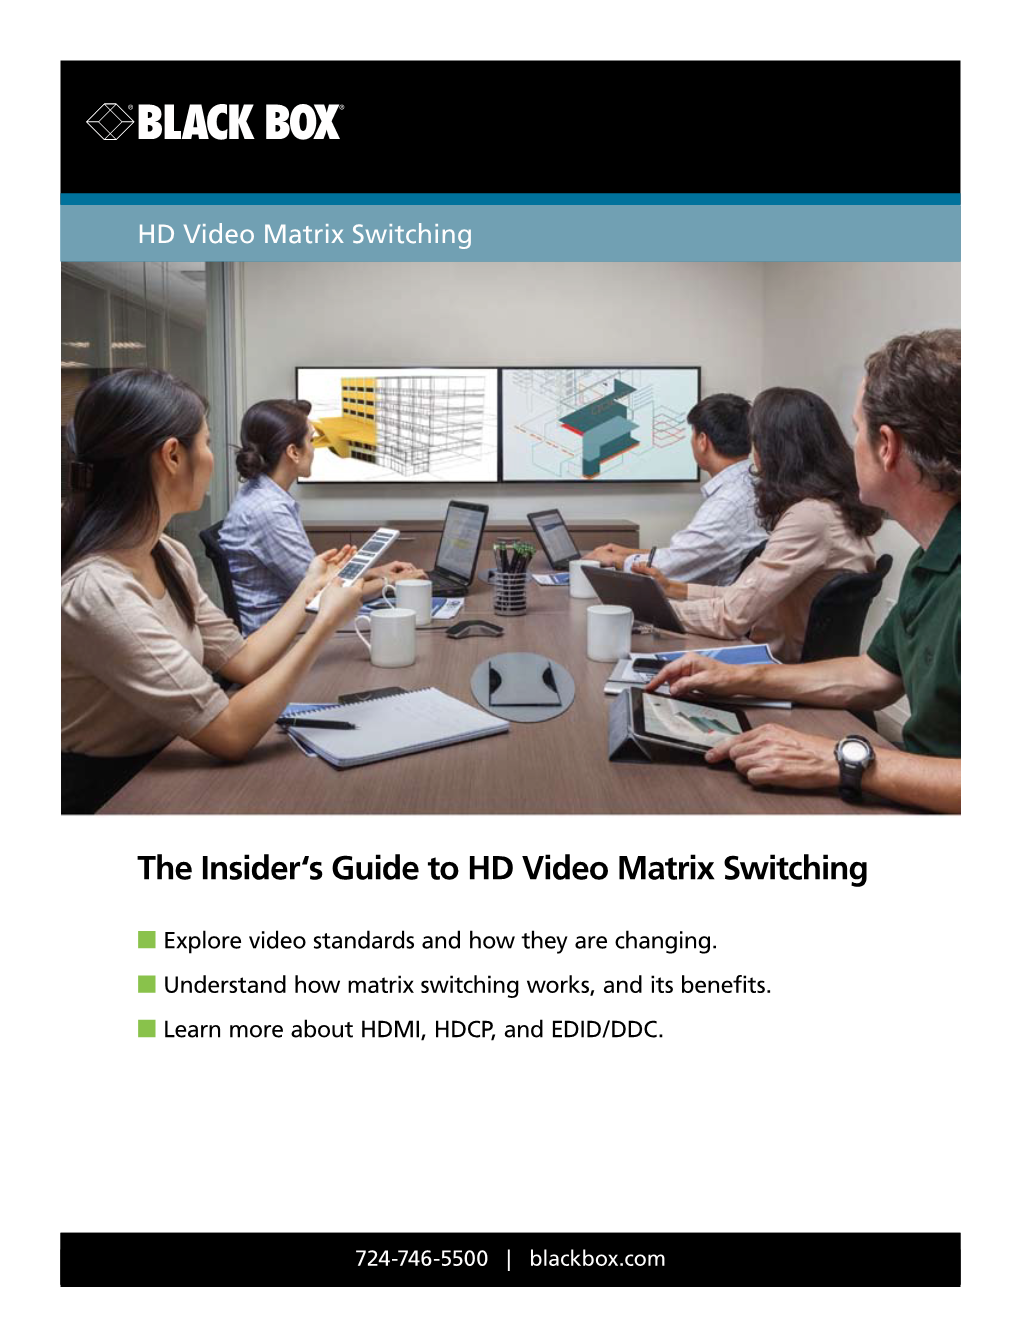 The Insider's Guide to HD Video Matrix Switching